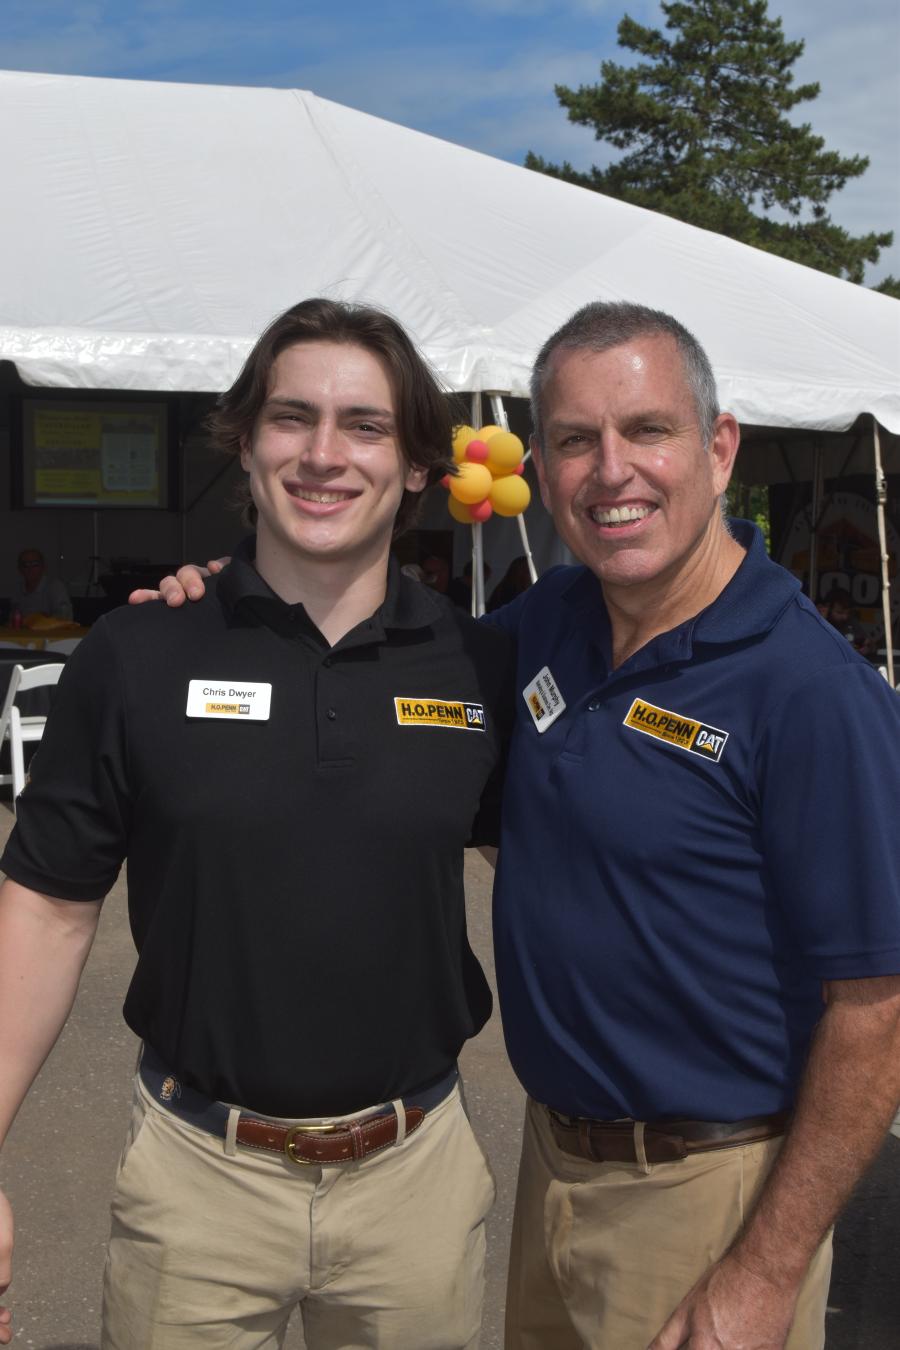 H.O. Penn’s John Murphy (R) shares his years of wisdom with Chris Dwyer, who has a summer apprenticeship with H.O. Penn while he attends Purdue University.
(CEG photo) 